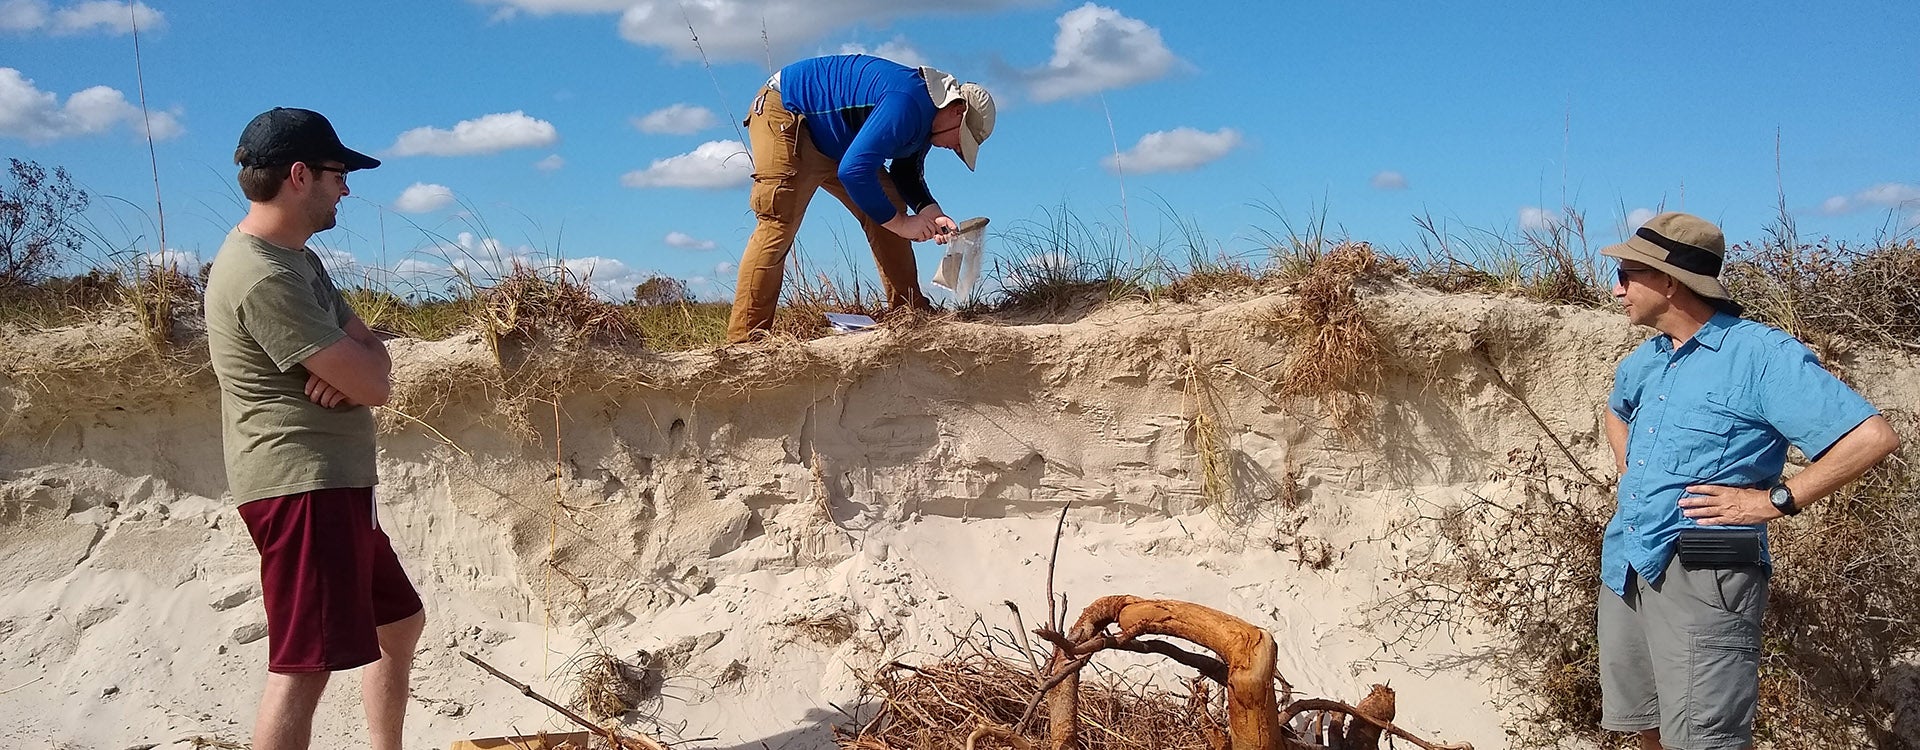 Graduate student Cody Allen (center) collects samples along the shoreline at Hammocks Beach State Park. Allen is working on Mallinson’s team to investigate how the coastline has changed after Hurricane Florence. Also pictured are ECU student Taylor Miller (left) and Dr. Steve Culver (right).